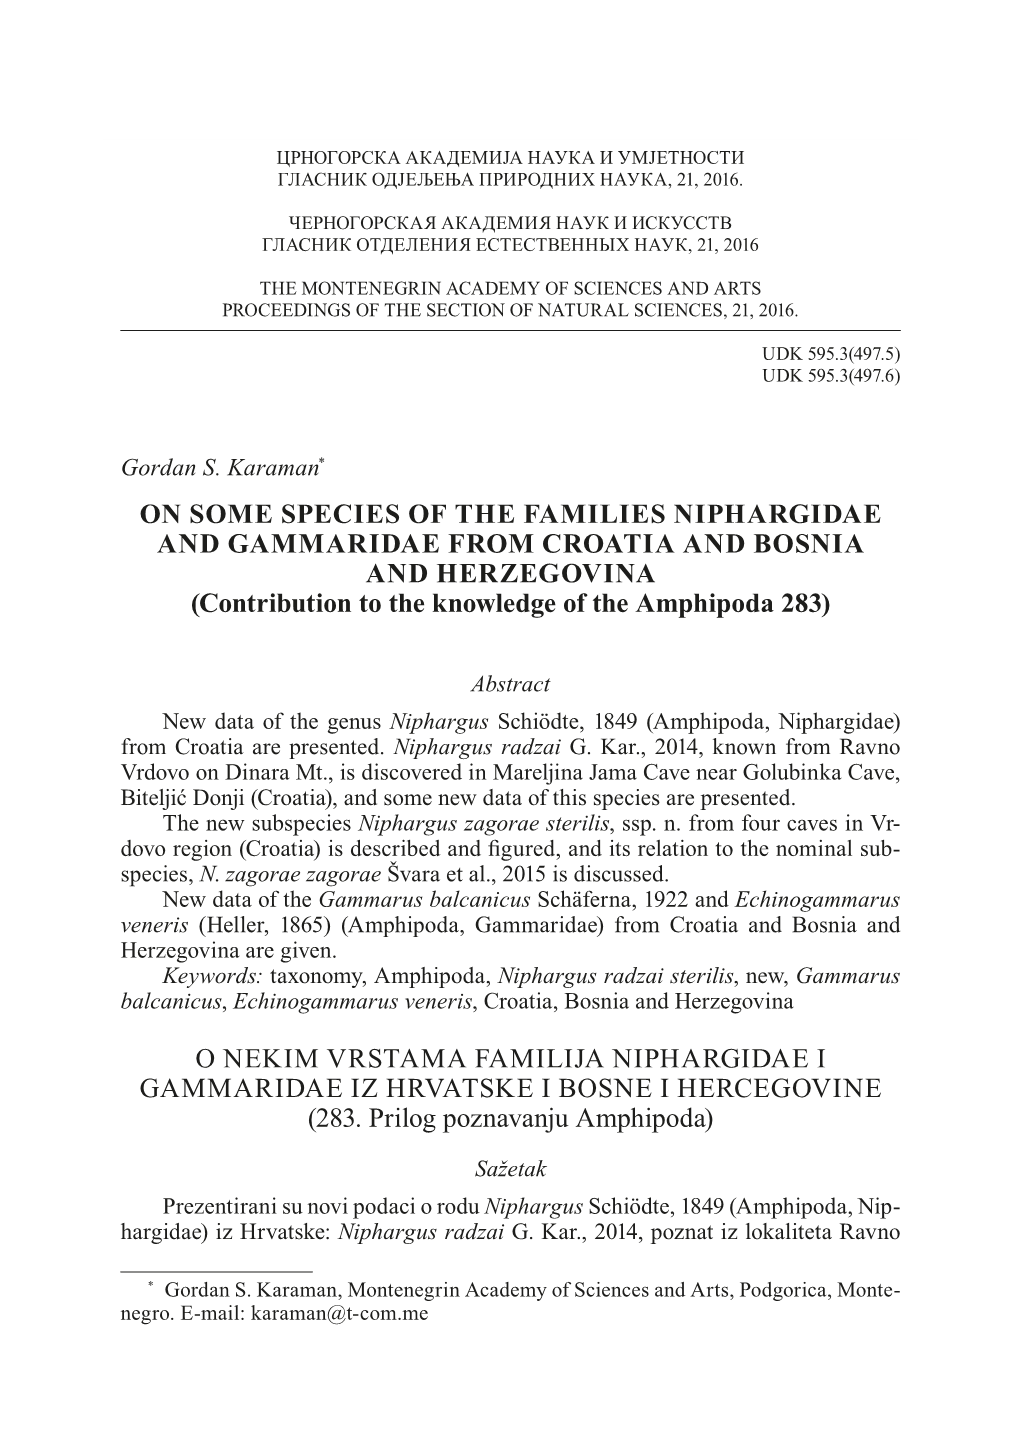 On Some Species of the Families Niphargidae and Gammaridae from Croatia and Bosnia and Herzegovina (Contribution to the Knowledge of The27 Amphipoda 283)